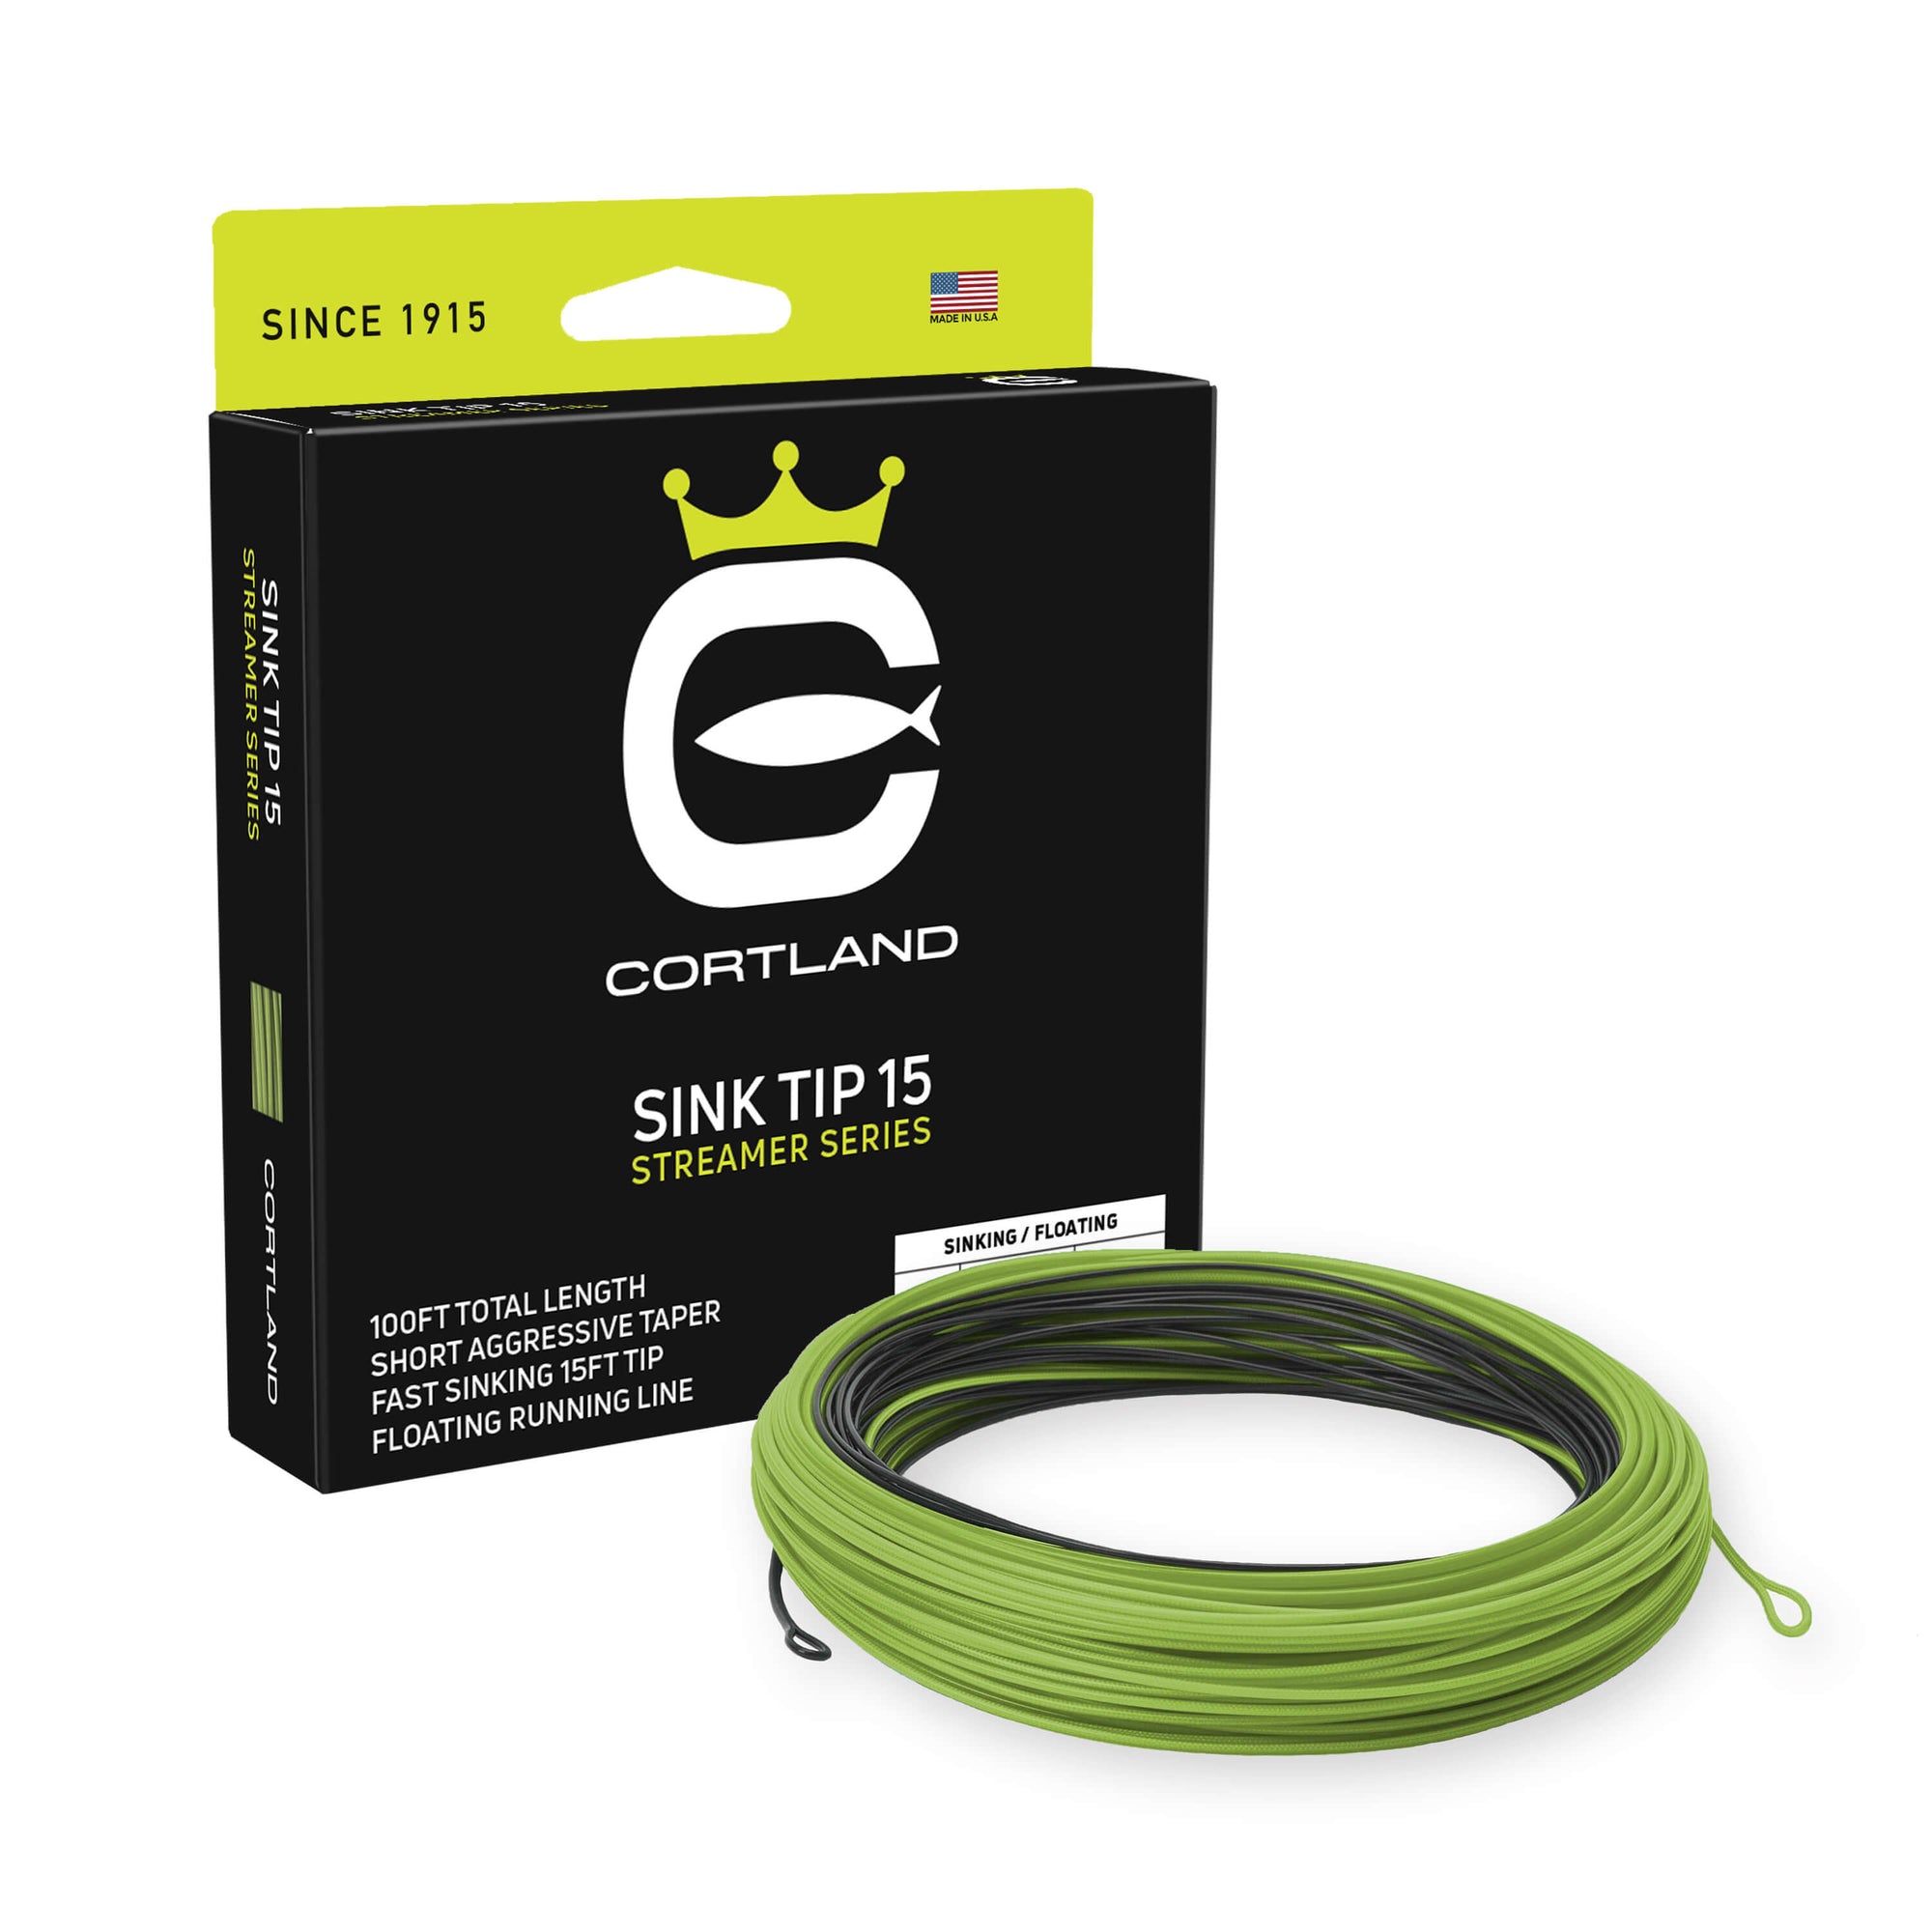 Streamer Sink Tip 15 Fly Line Box and coil. The coil is black and green. The box has the Cortland logo and is black and neon green at the top.